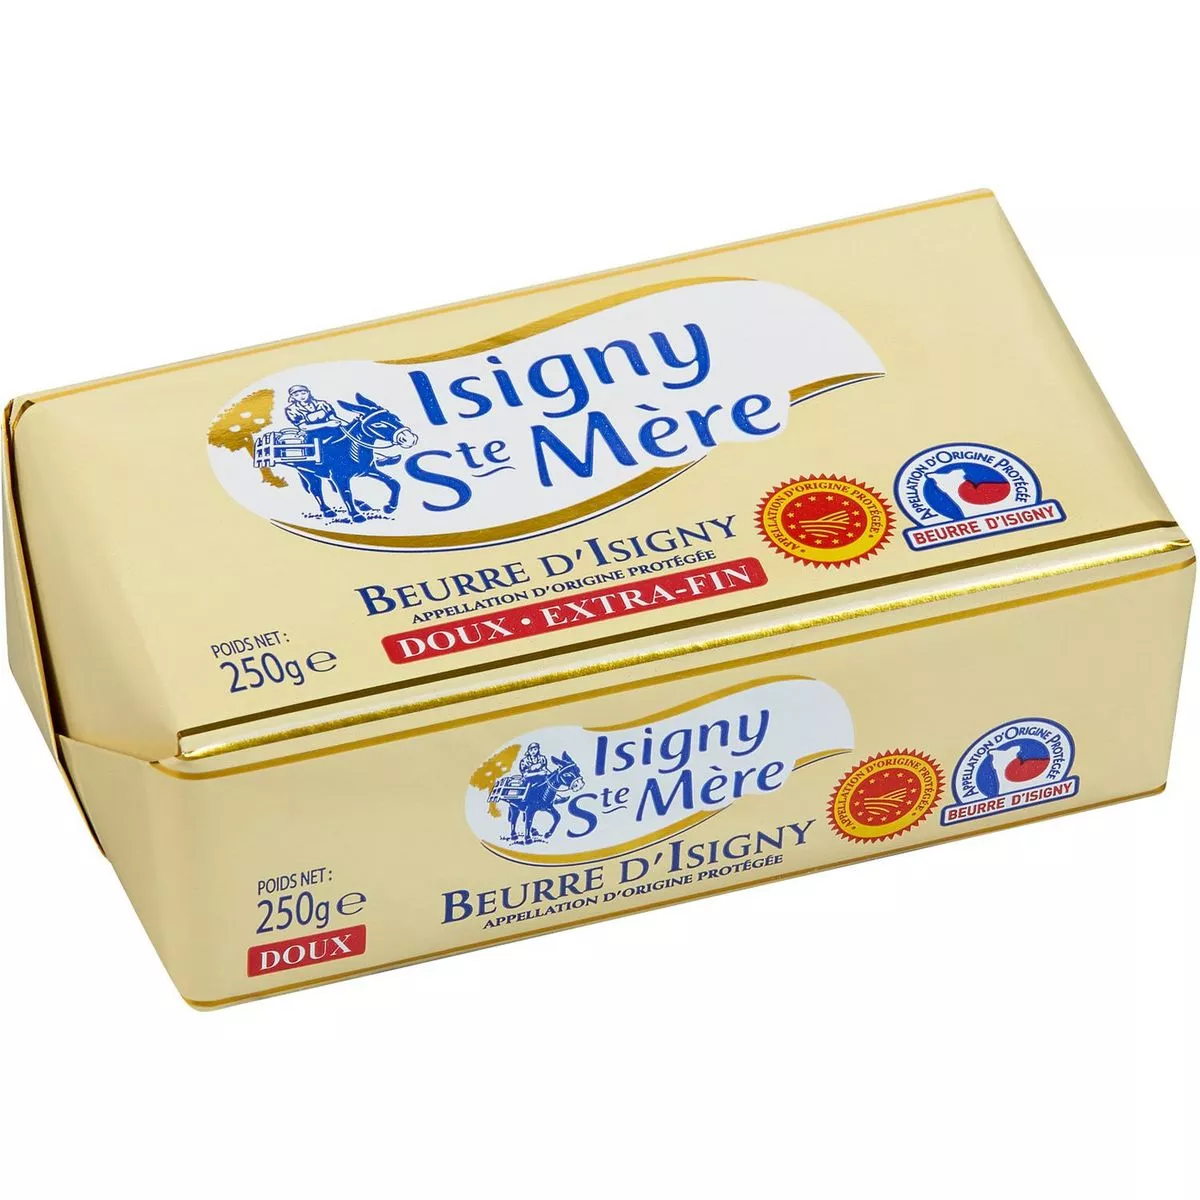 Isigny's butter unsalted AOC 250g